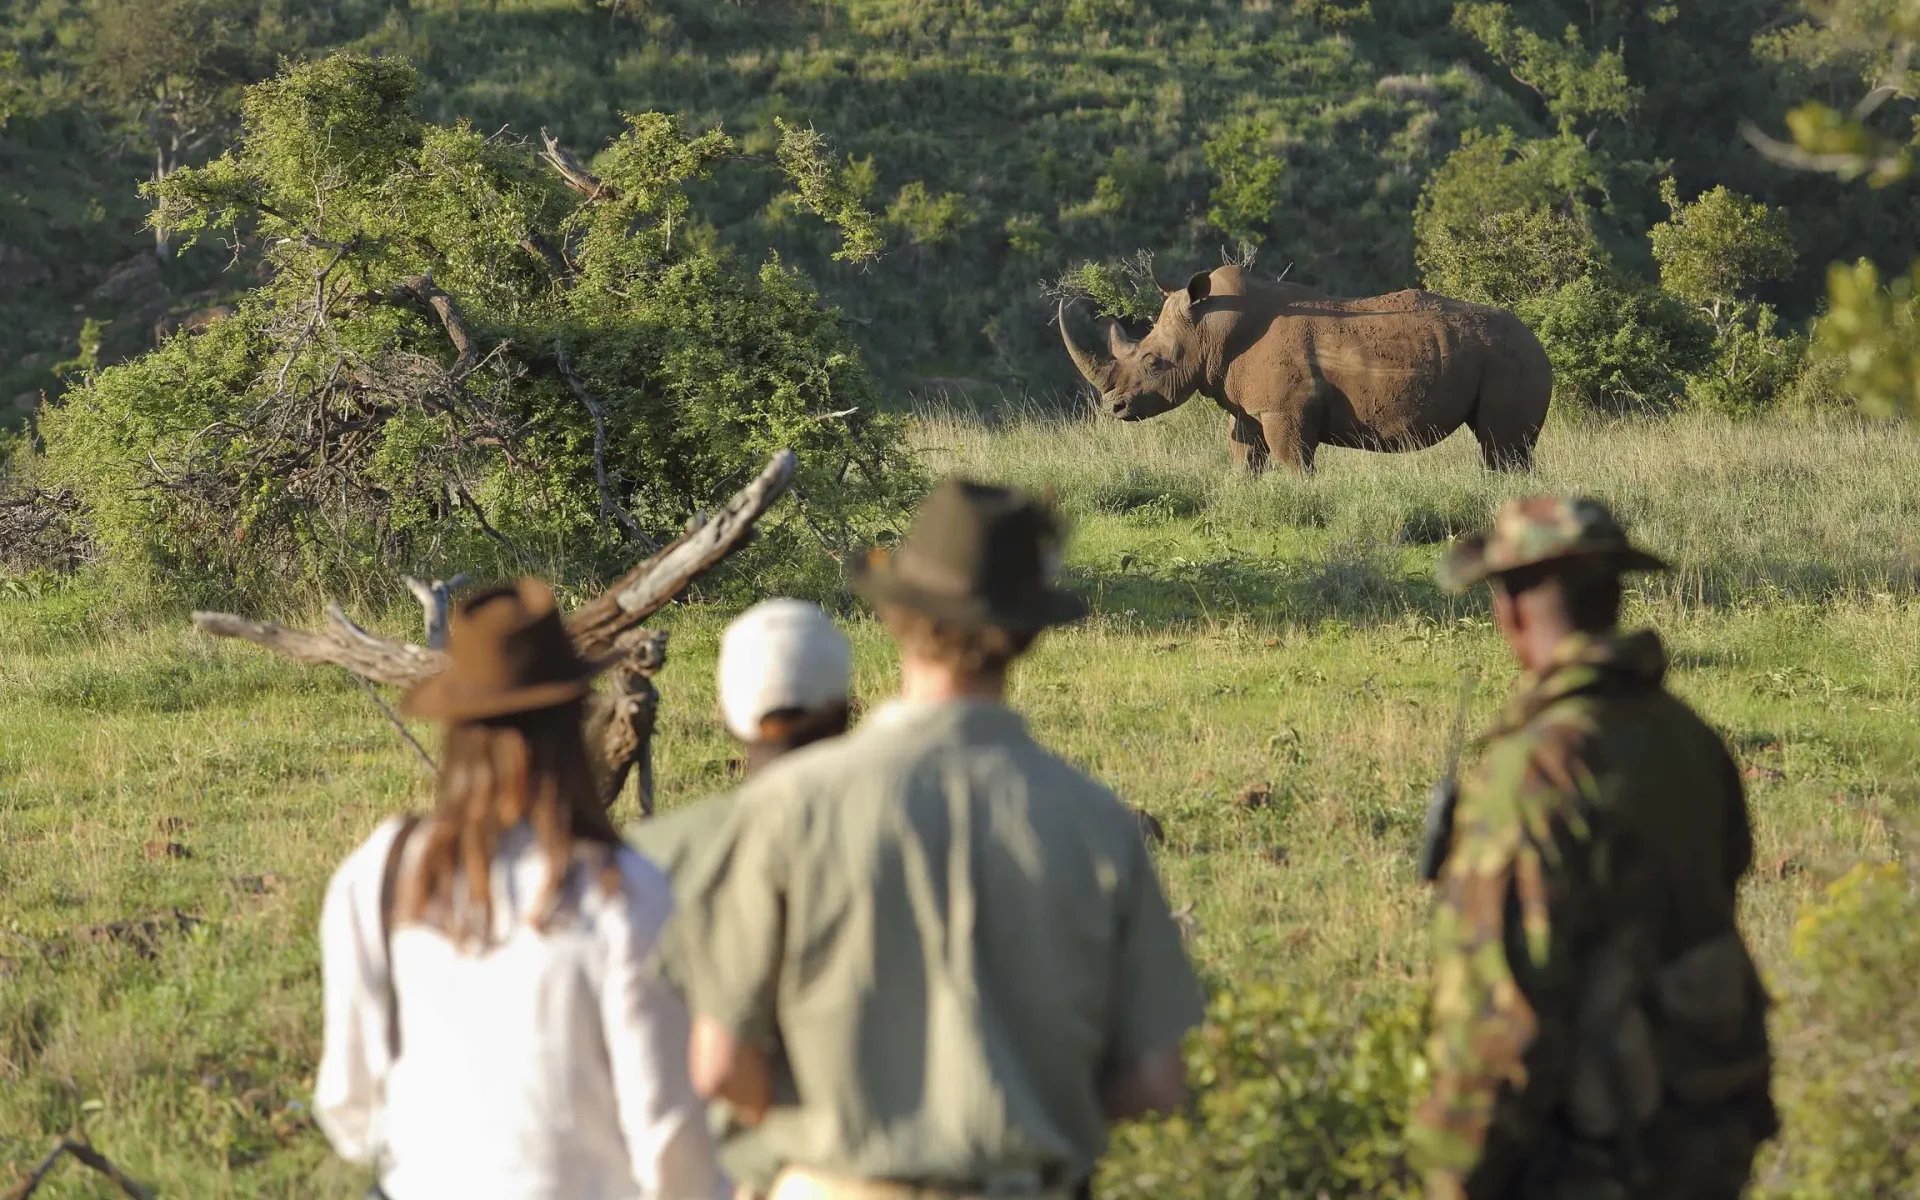 A group of people are looking at a rhino in the wild African bush.